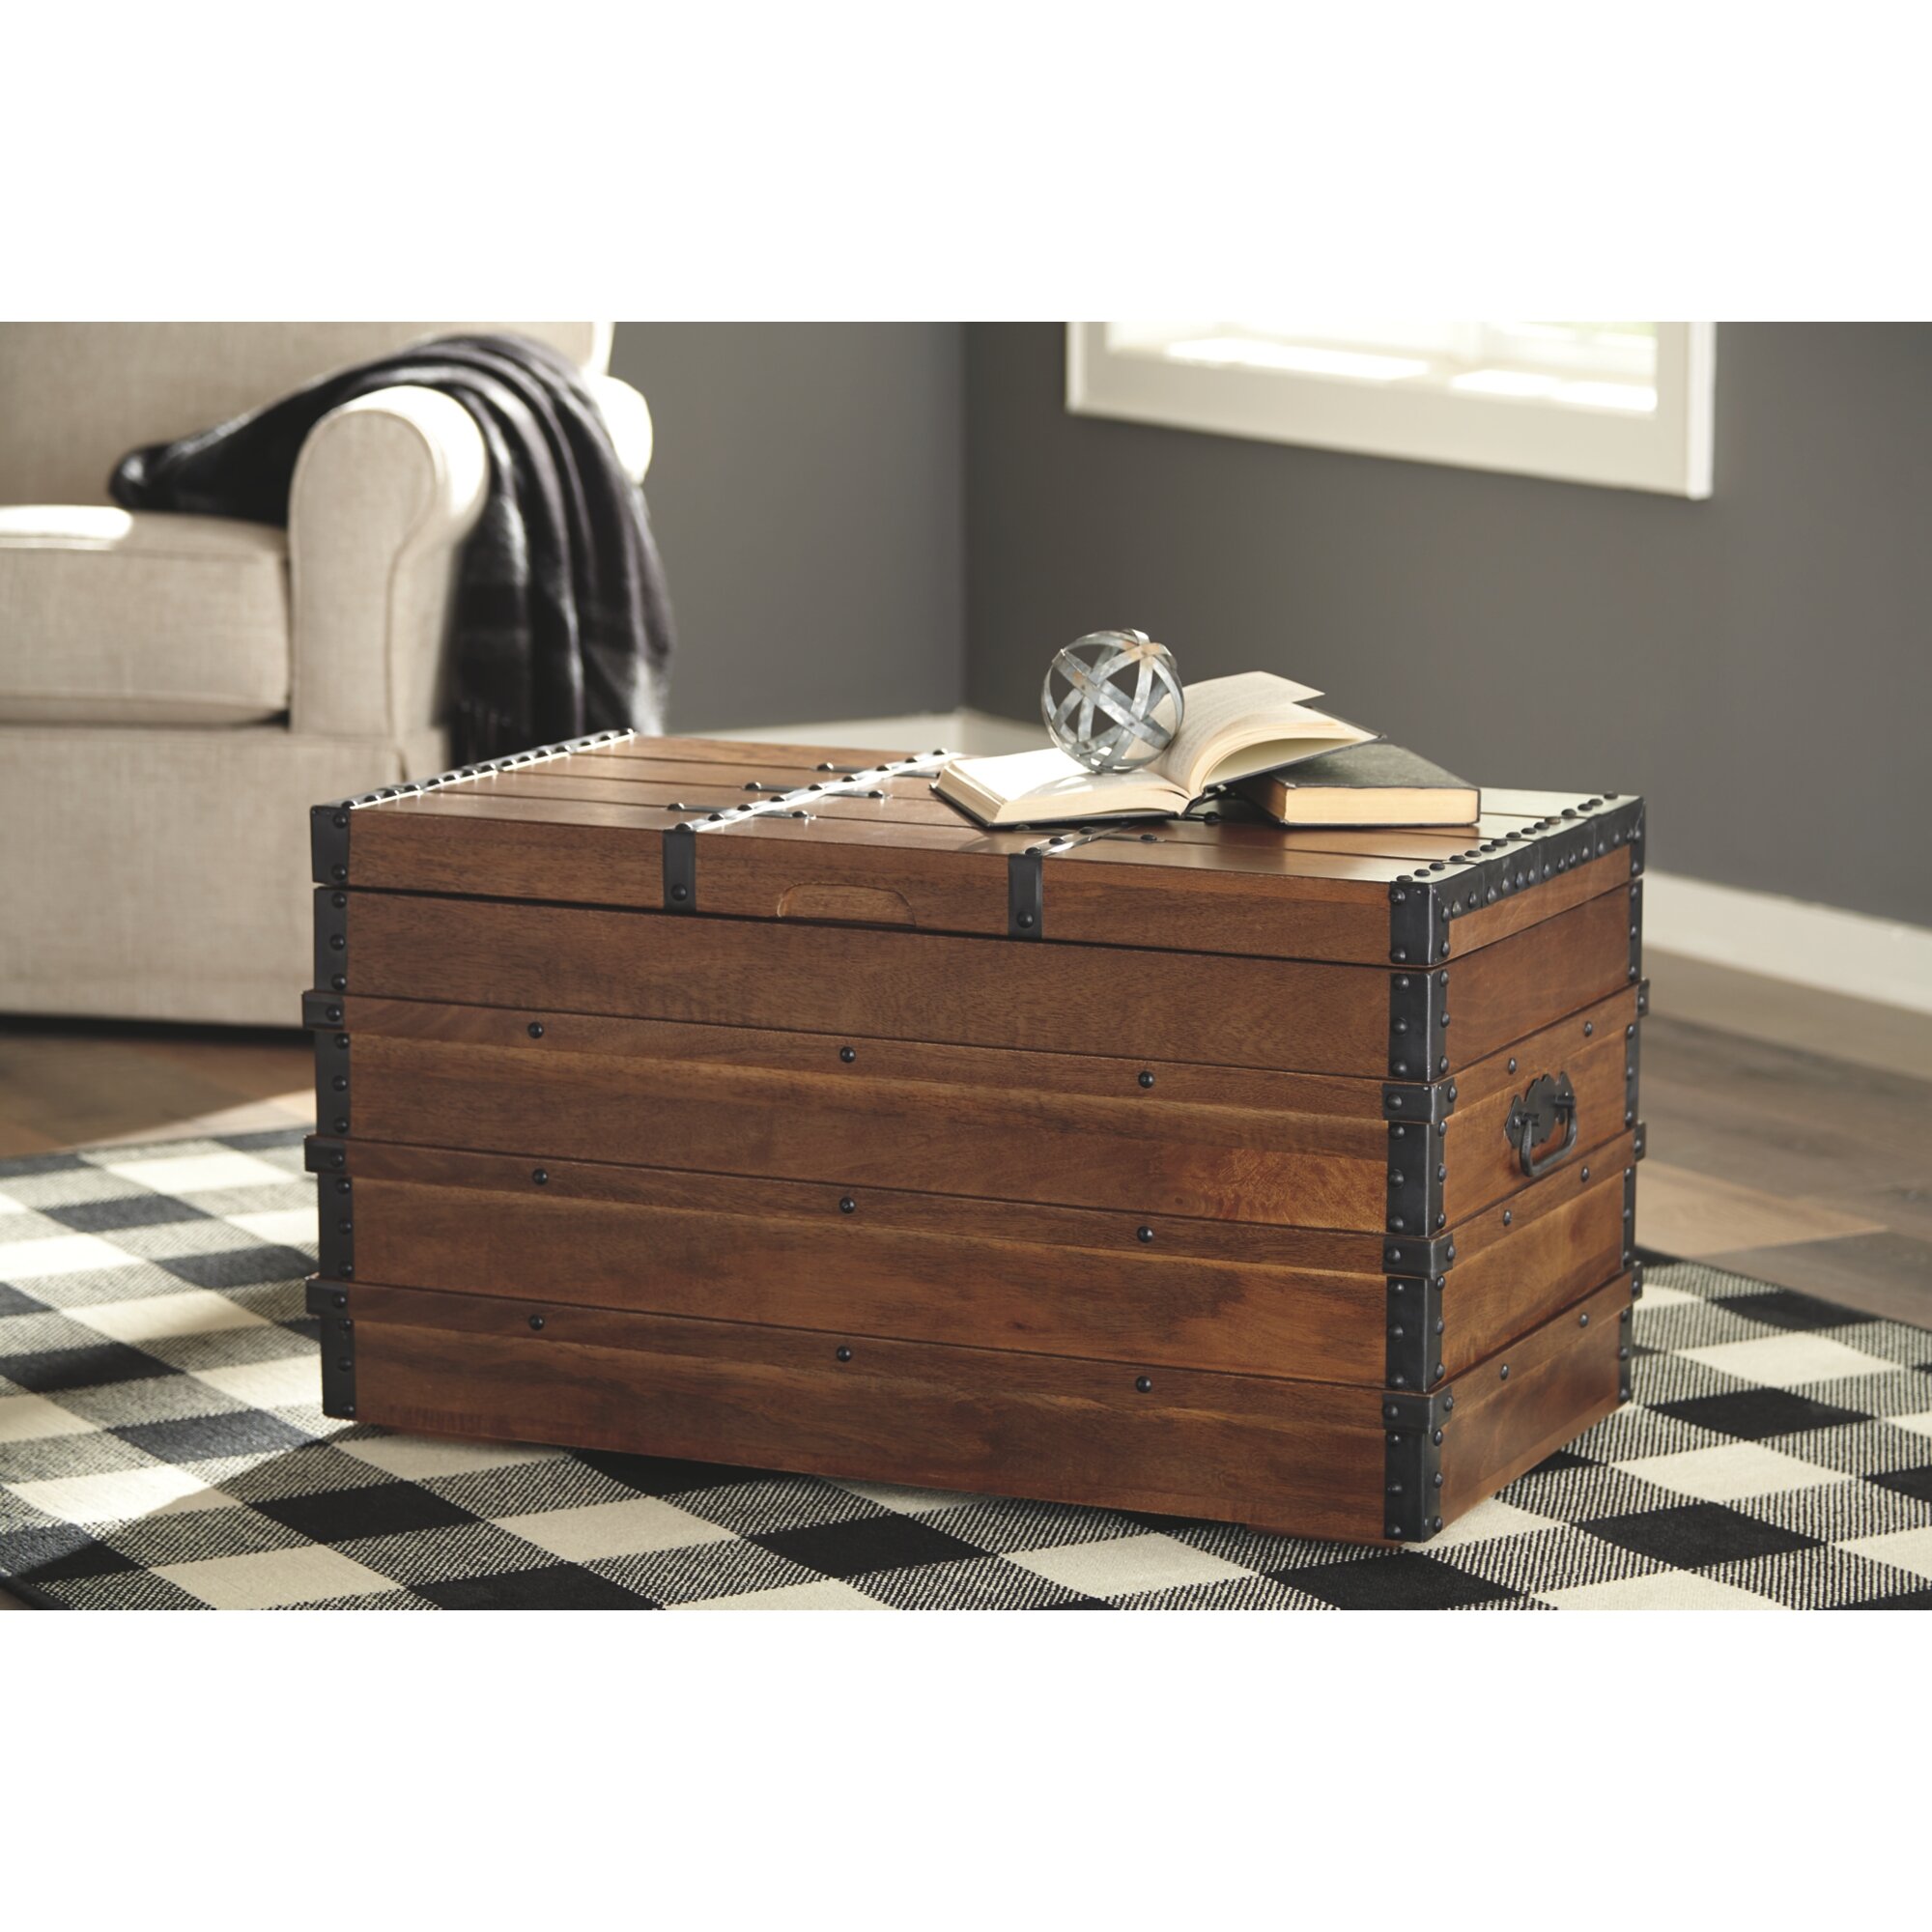 Small Urban Living French Rustic Wooden Storage Box Trunk Chest with Hinged Lid